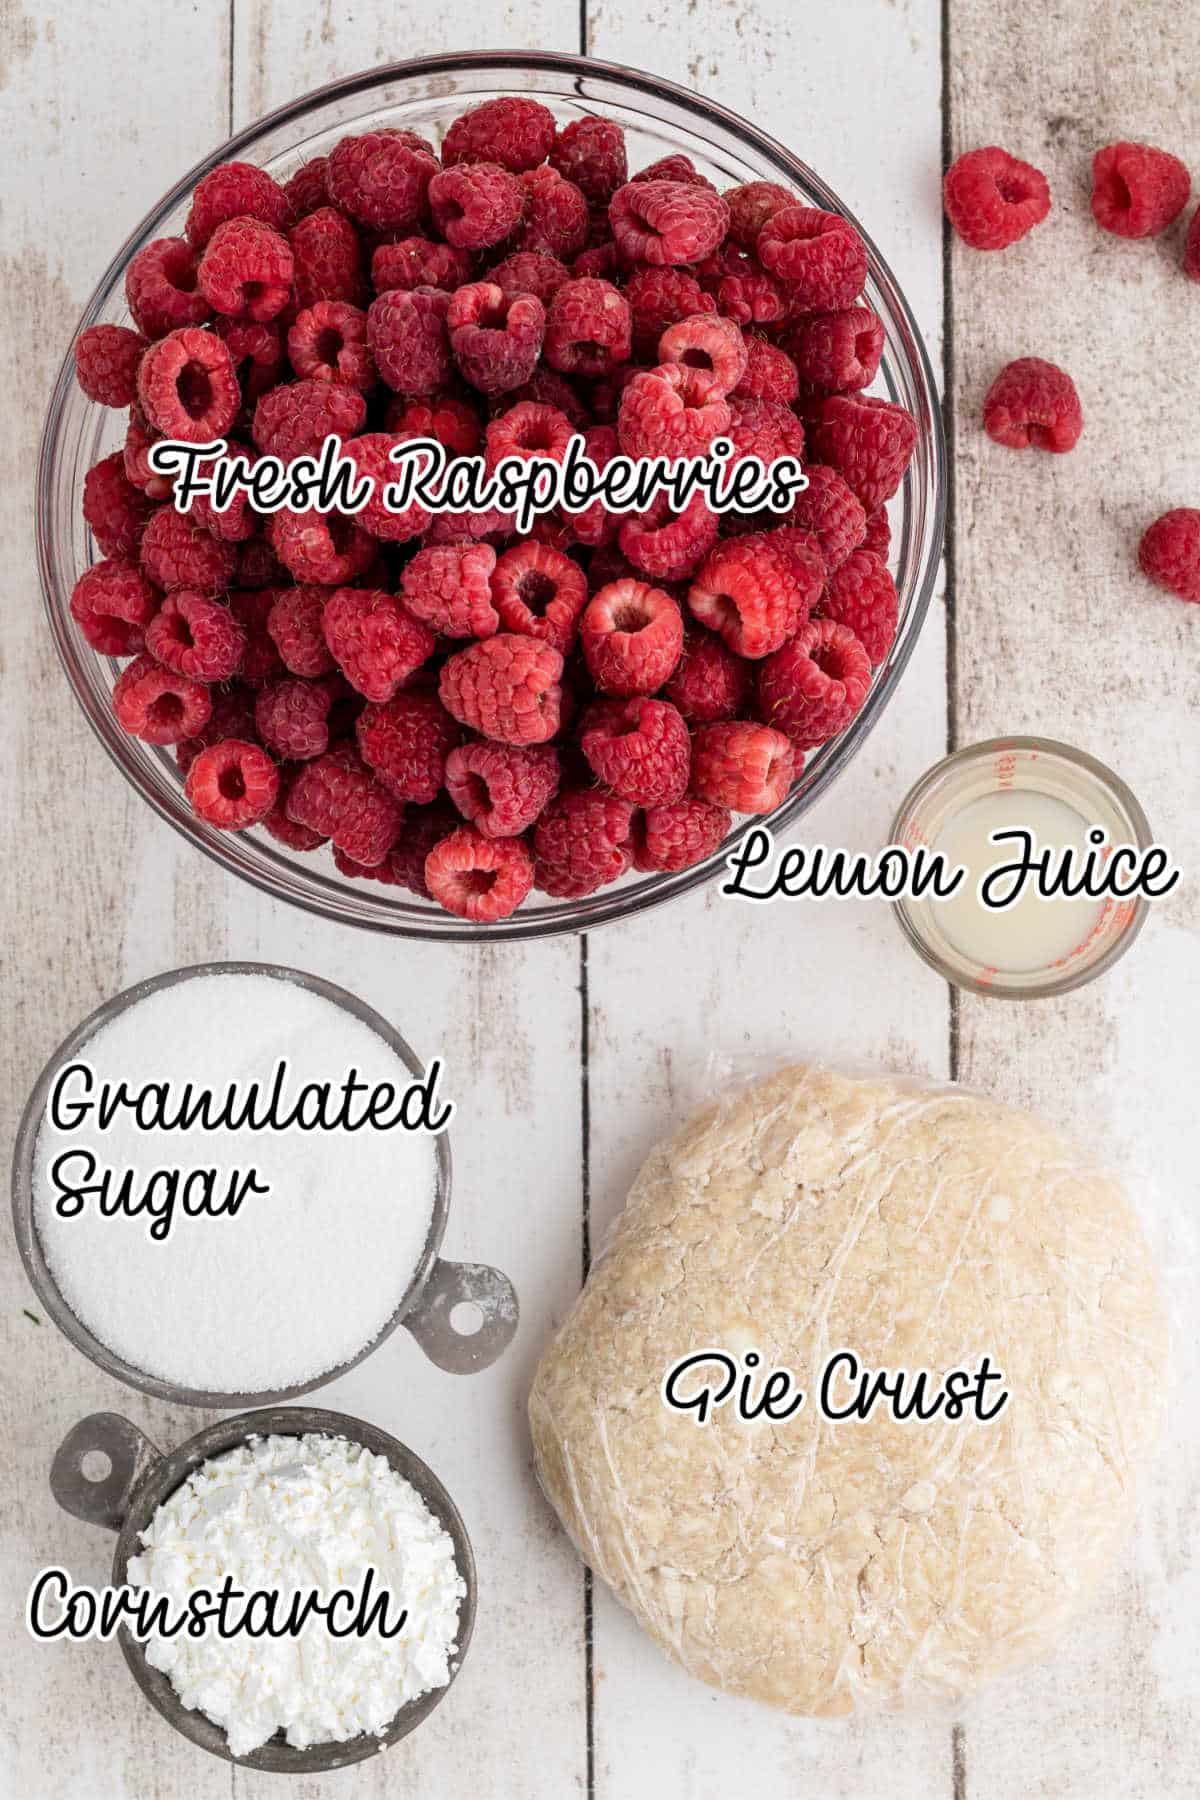 Overhead shot of ingredients needed to make a raspberry pie, with text overlay.